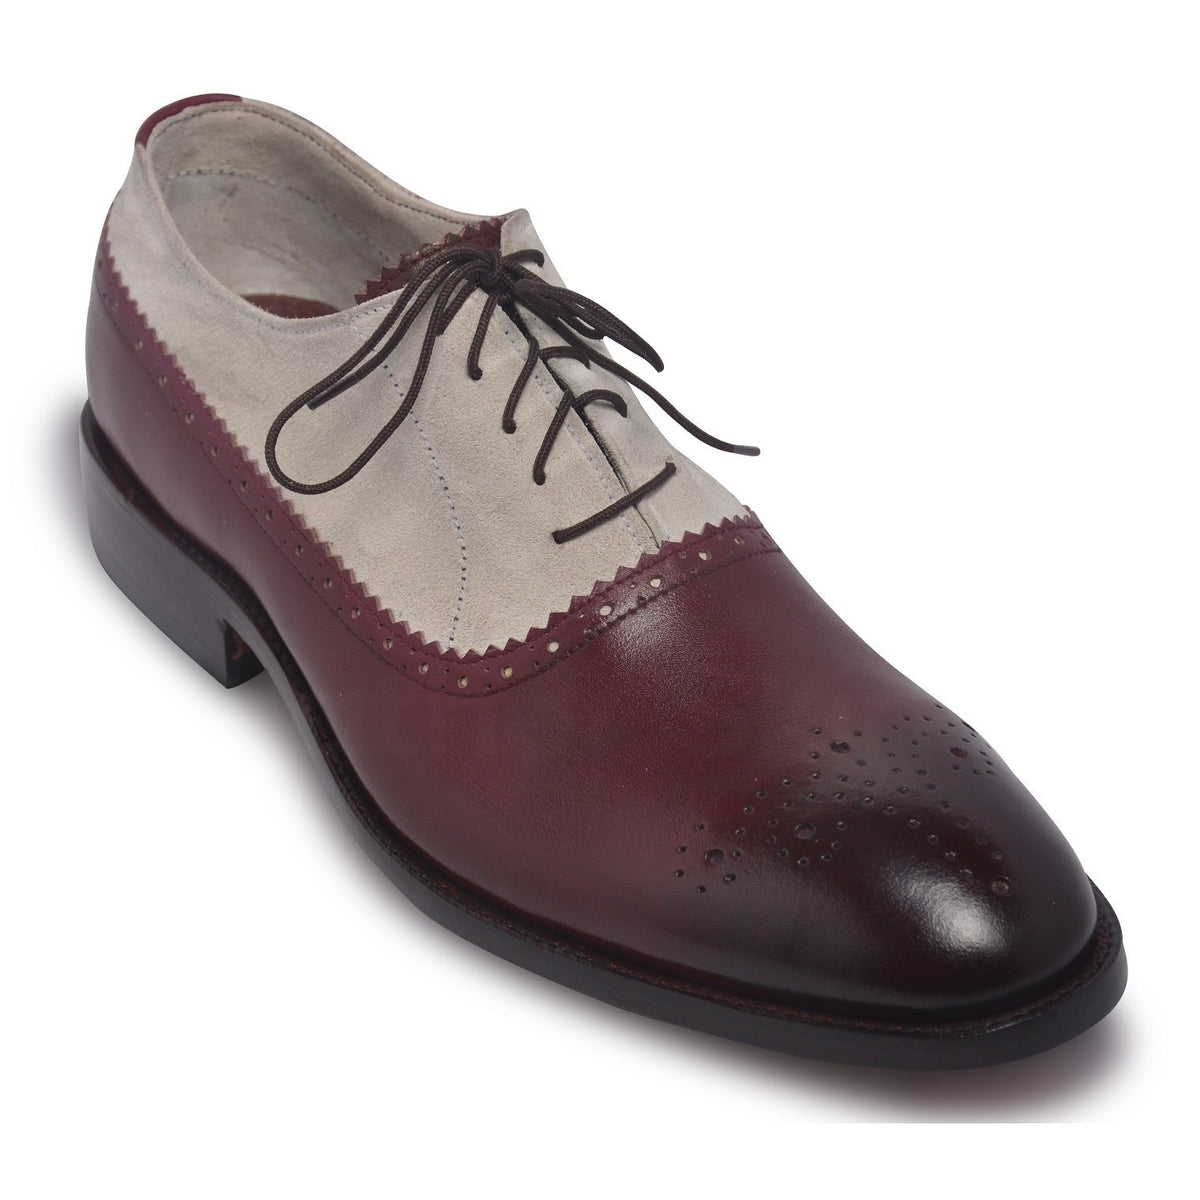 Oxford Burgundy Red Dress Shoes for Men Brogue Shoes